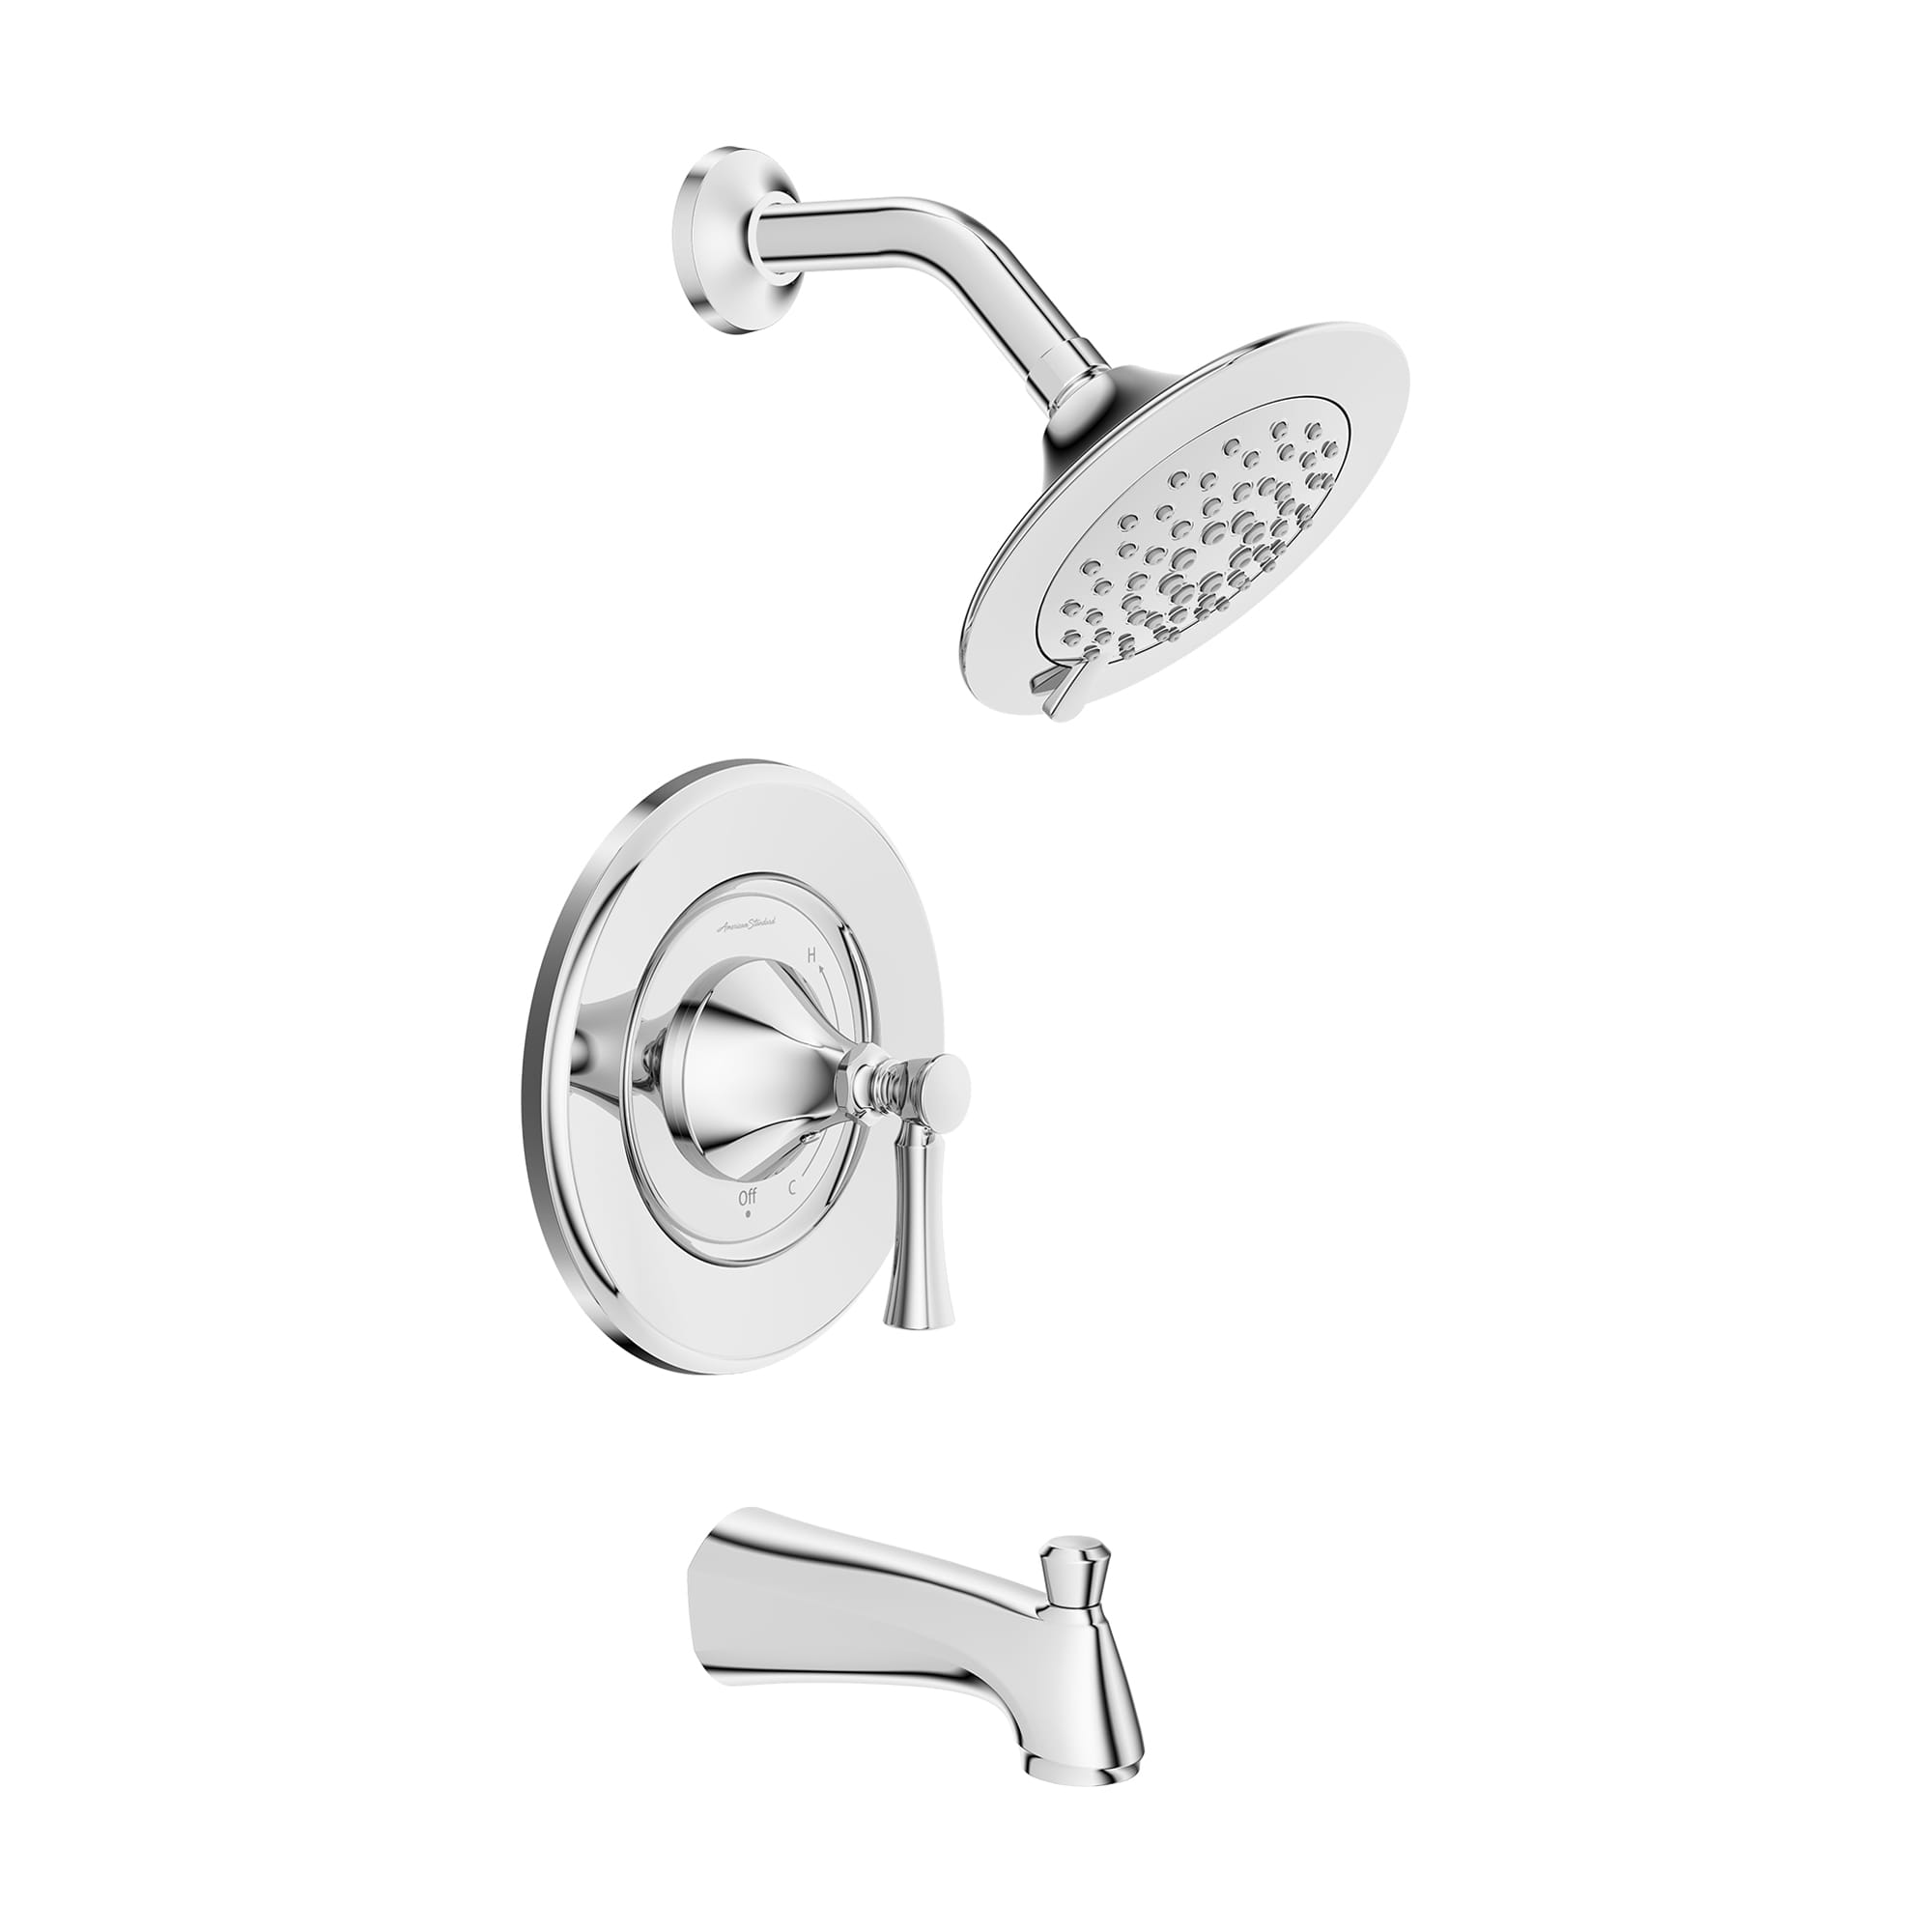 Chancellor 1.8 GPM Tub and Shower Trim Kit with Ceramic Disc Valve Cartridge and Lever Handle